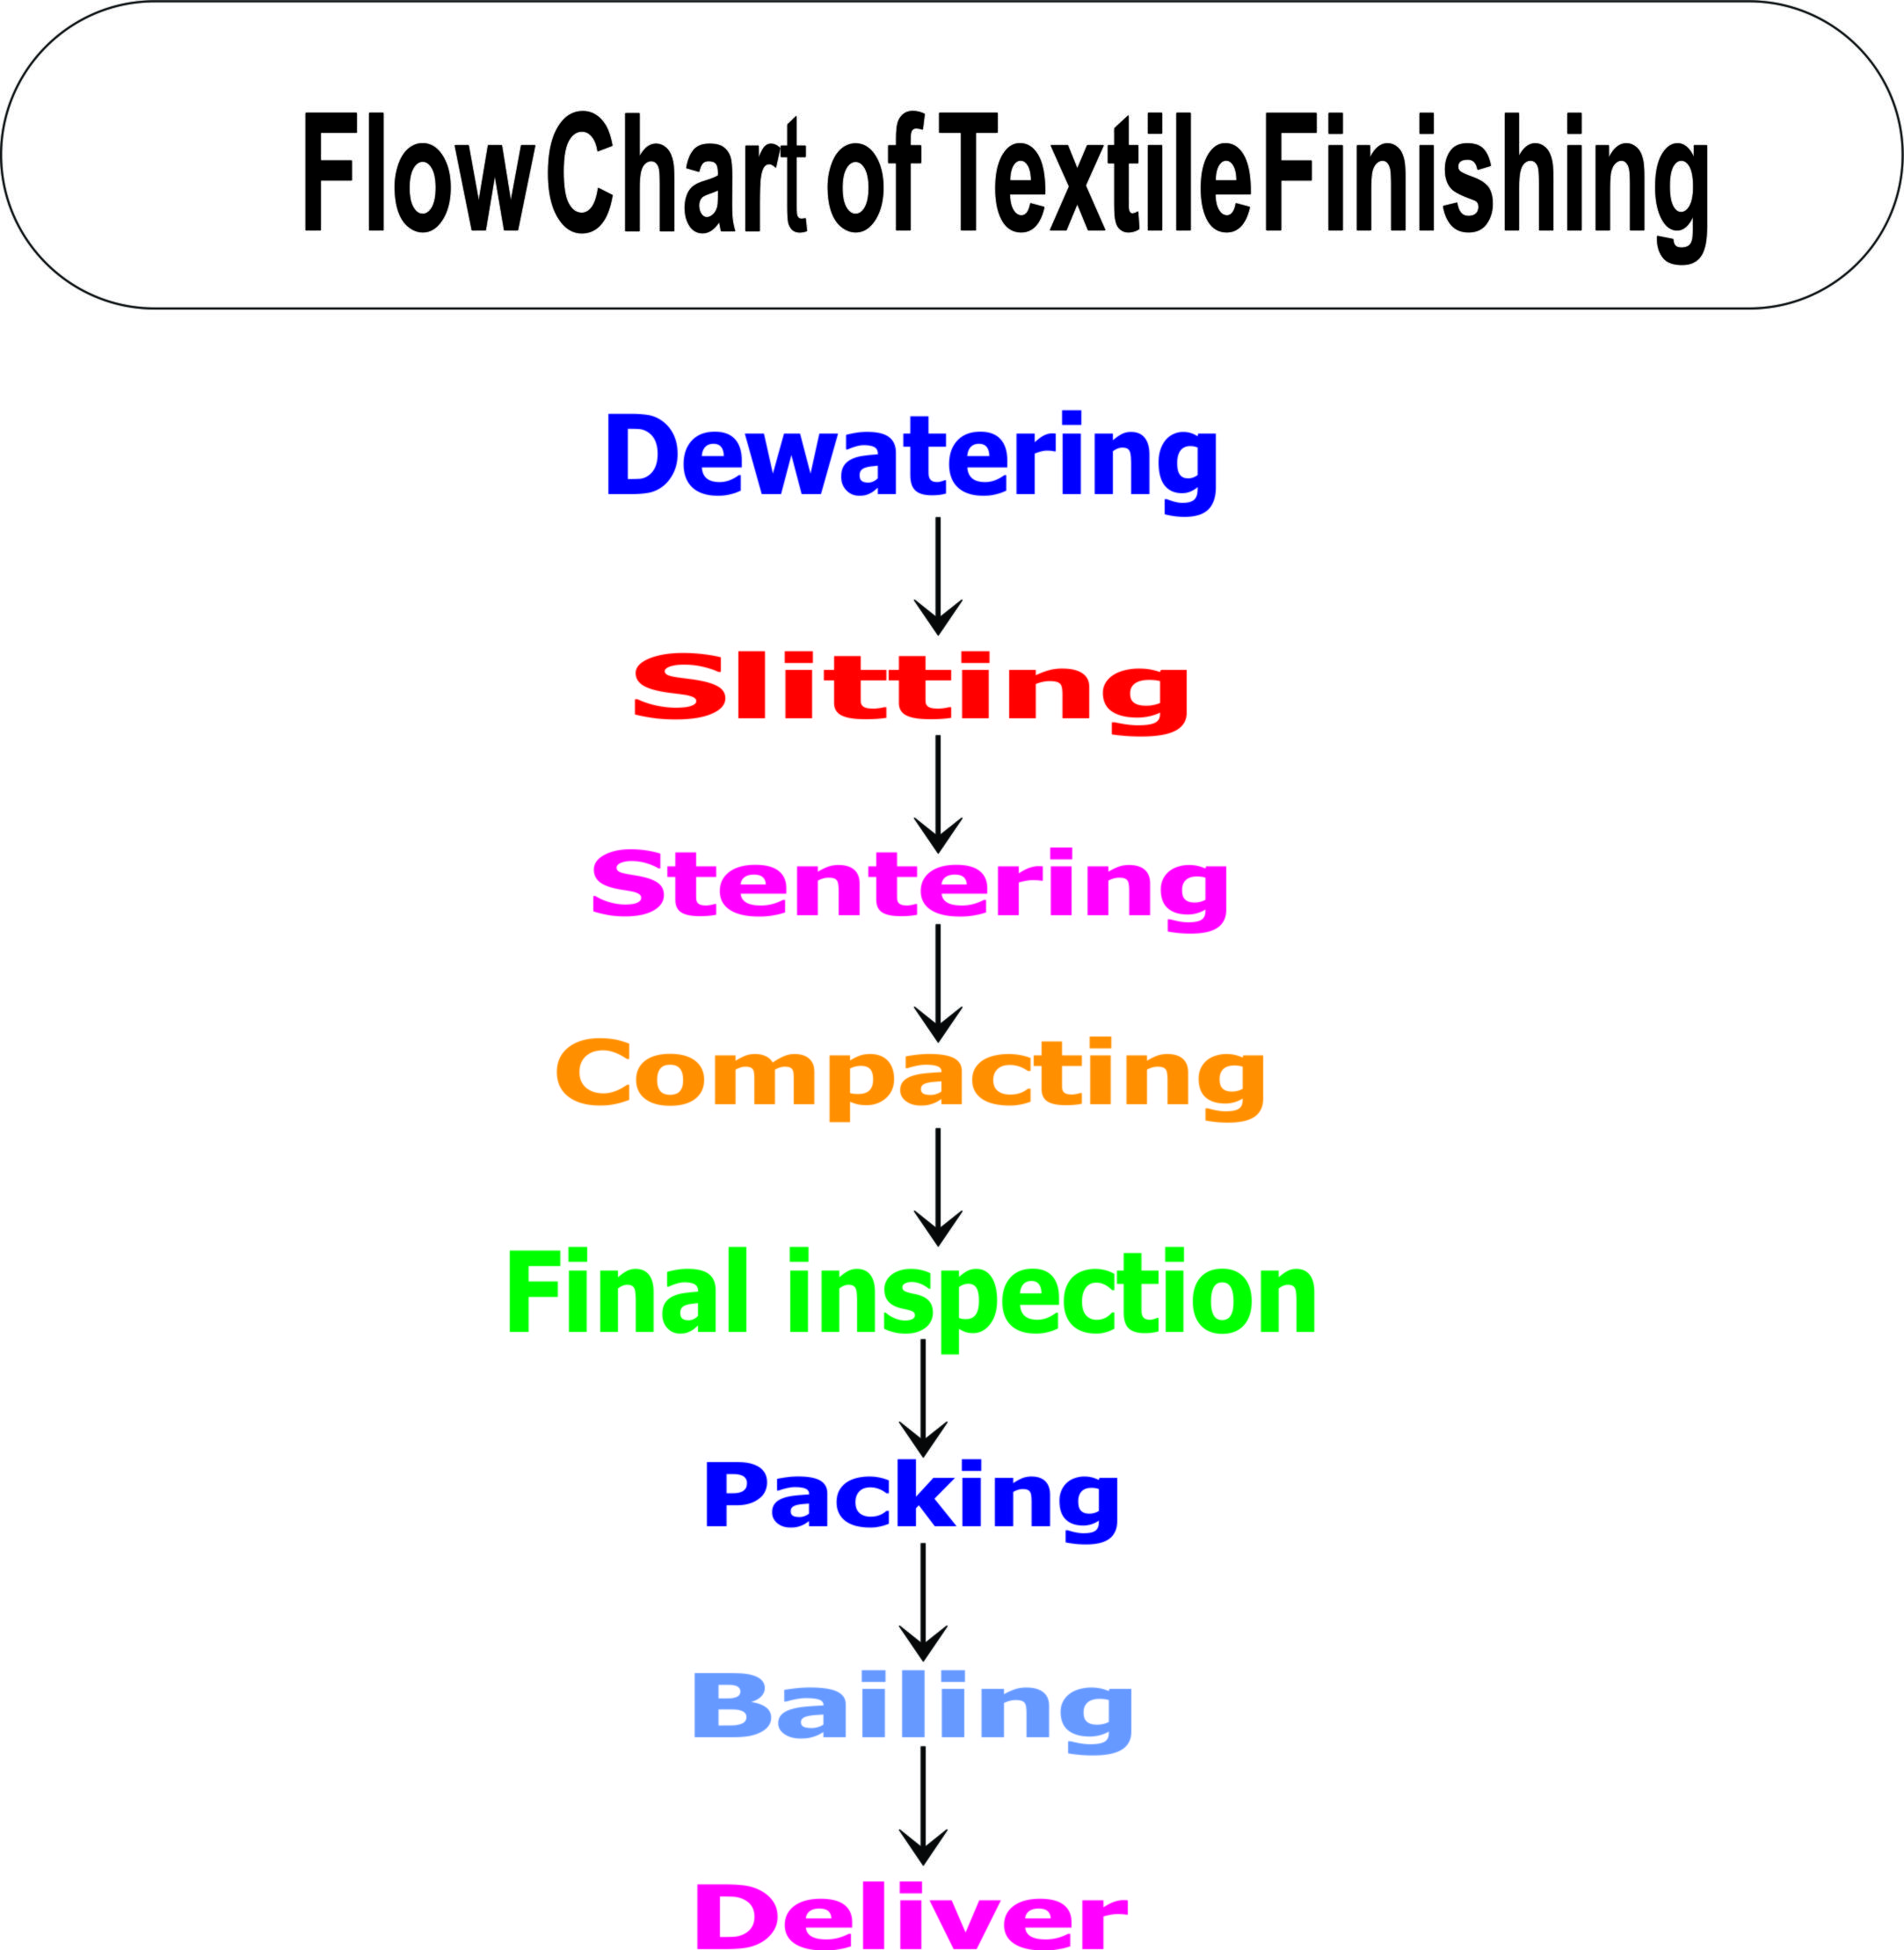 Flow Chart of Textile Finishing